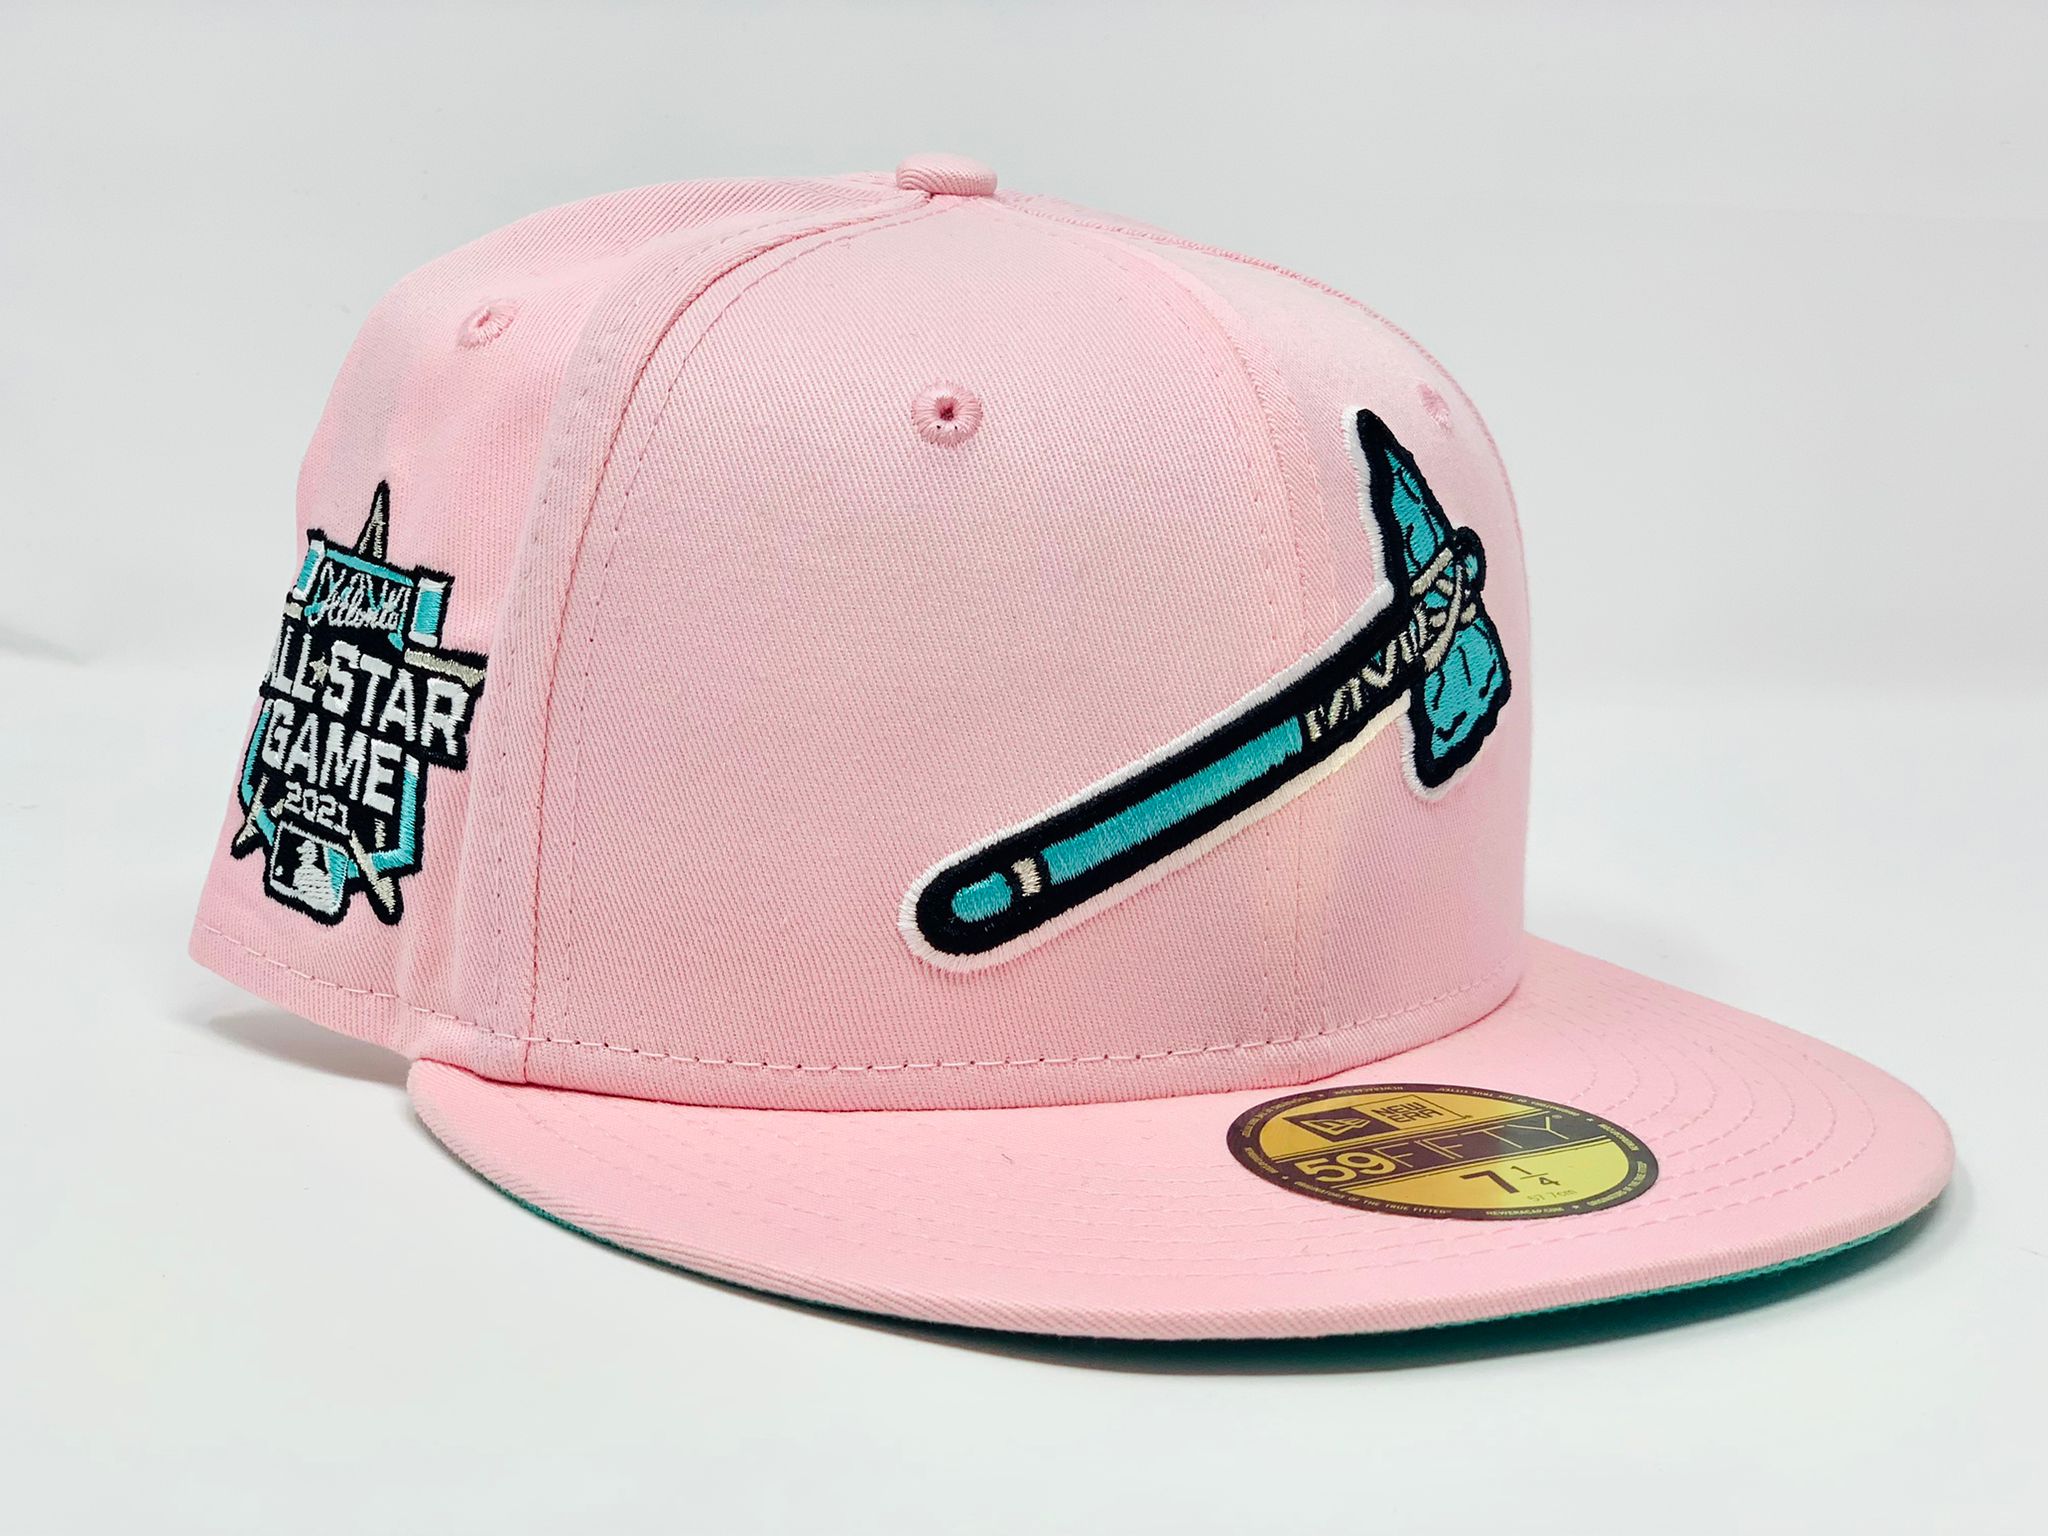 New Era 59FIFTY Jae Tips Forever Atlanta Braves 2000 All Star Game Patch Hat - Pink, Lime Green Pink/Lime Green / 7 7/8